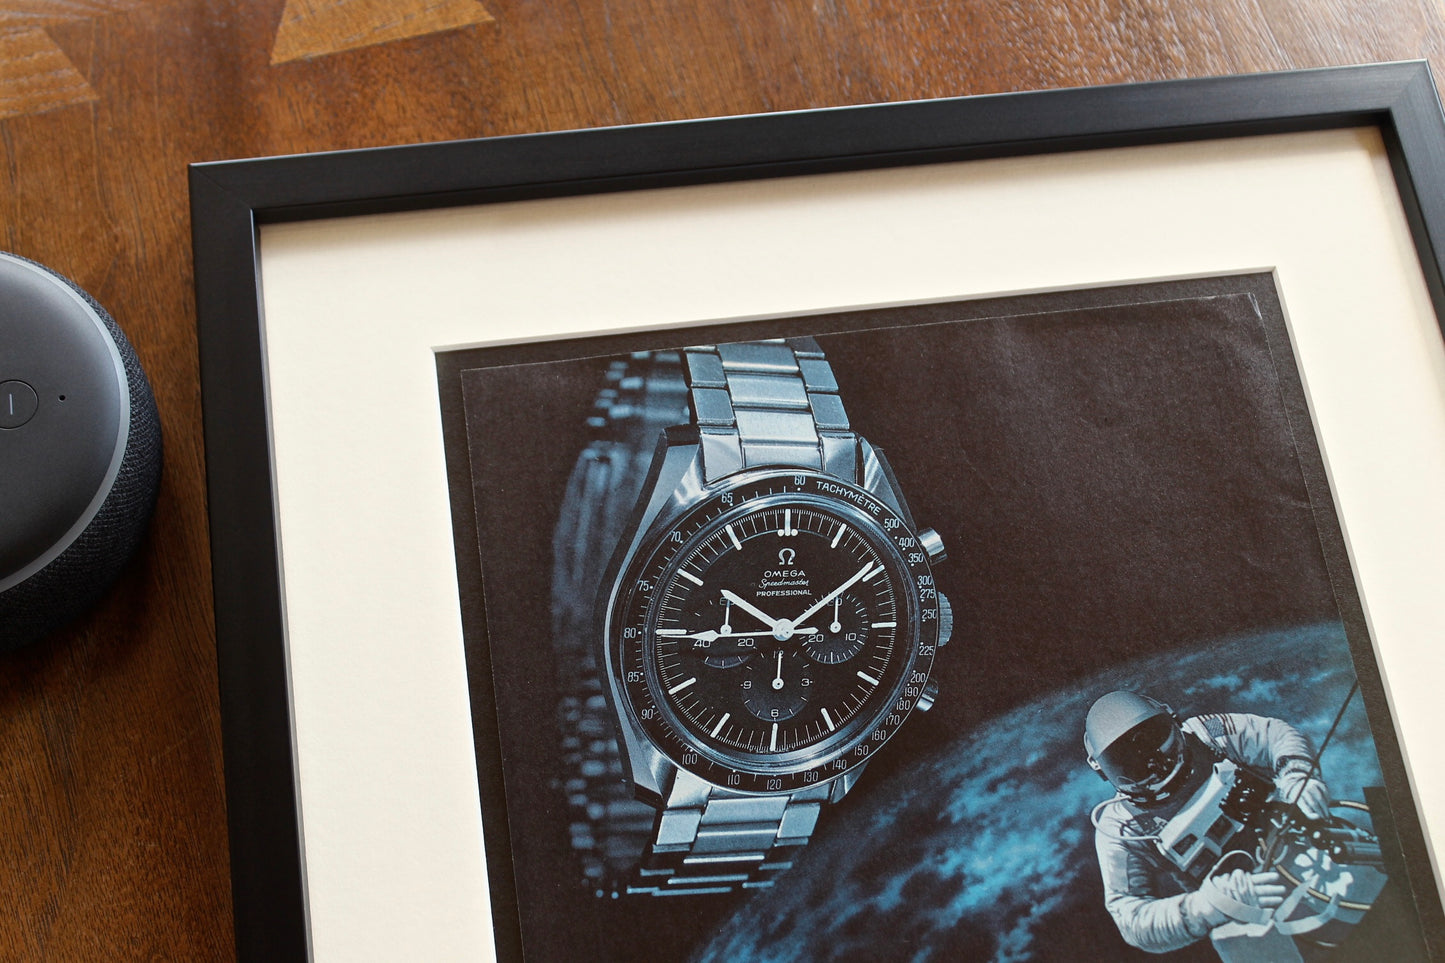 Omega Speedmaster Professional 'Astronauts Wear In Space' – Analog:Shift